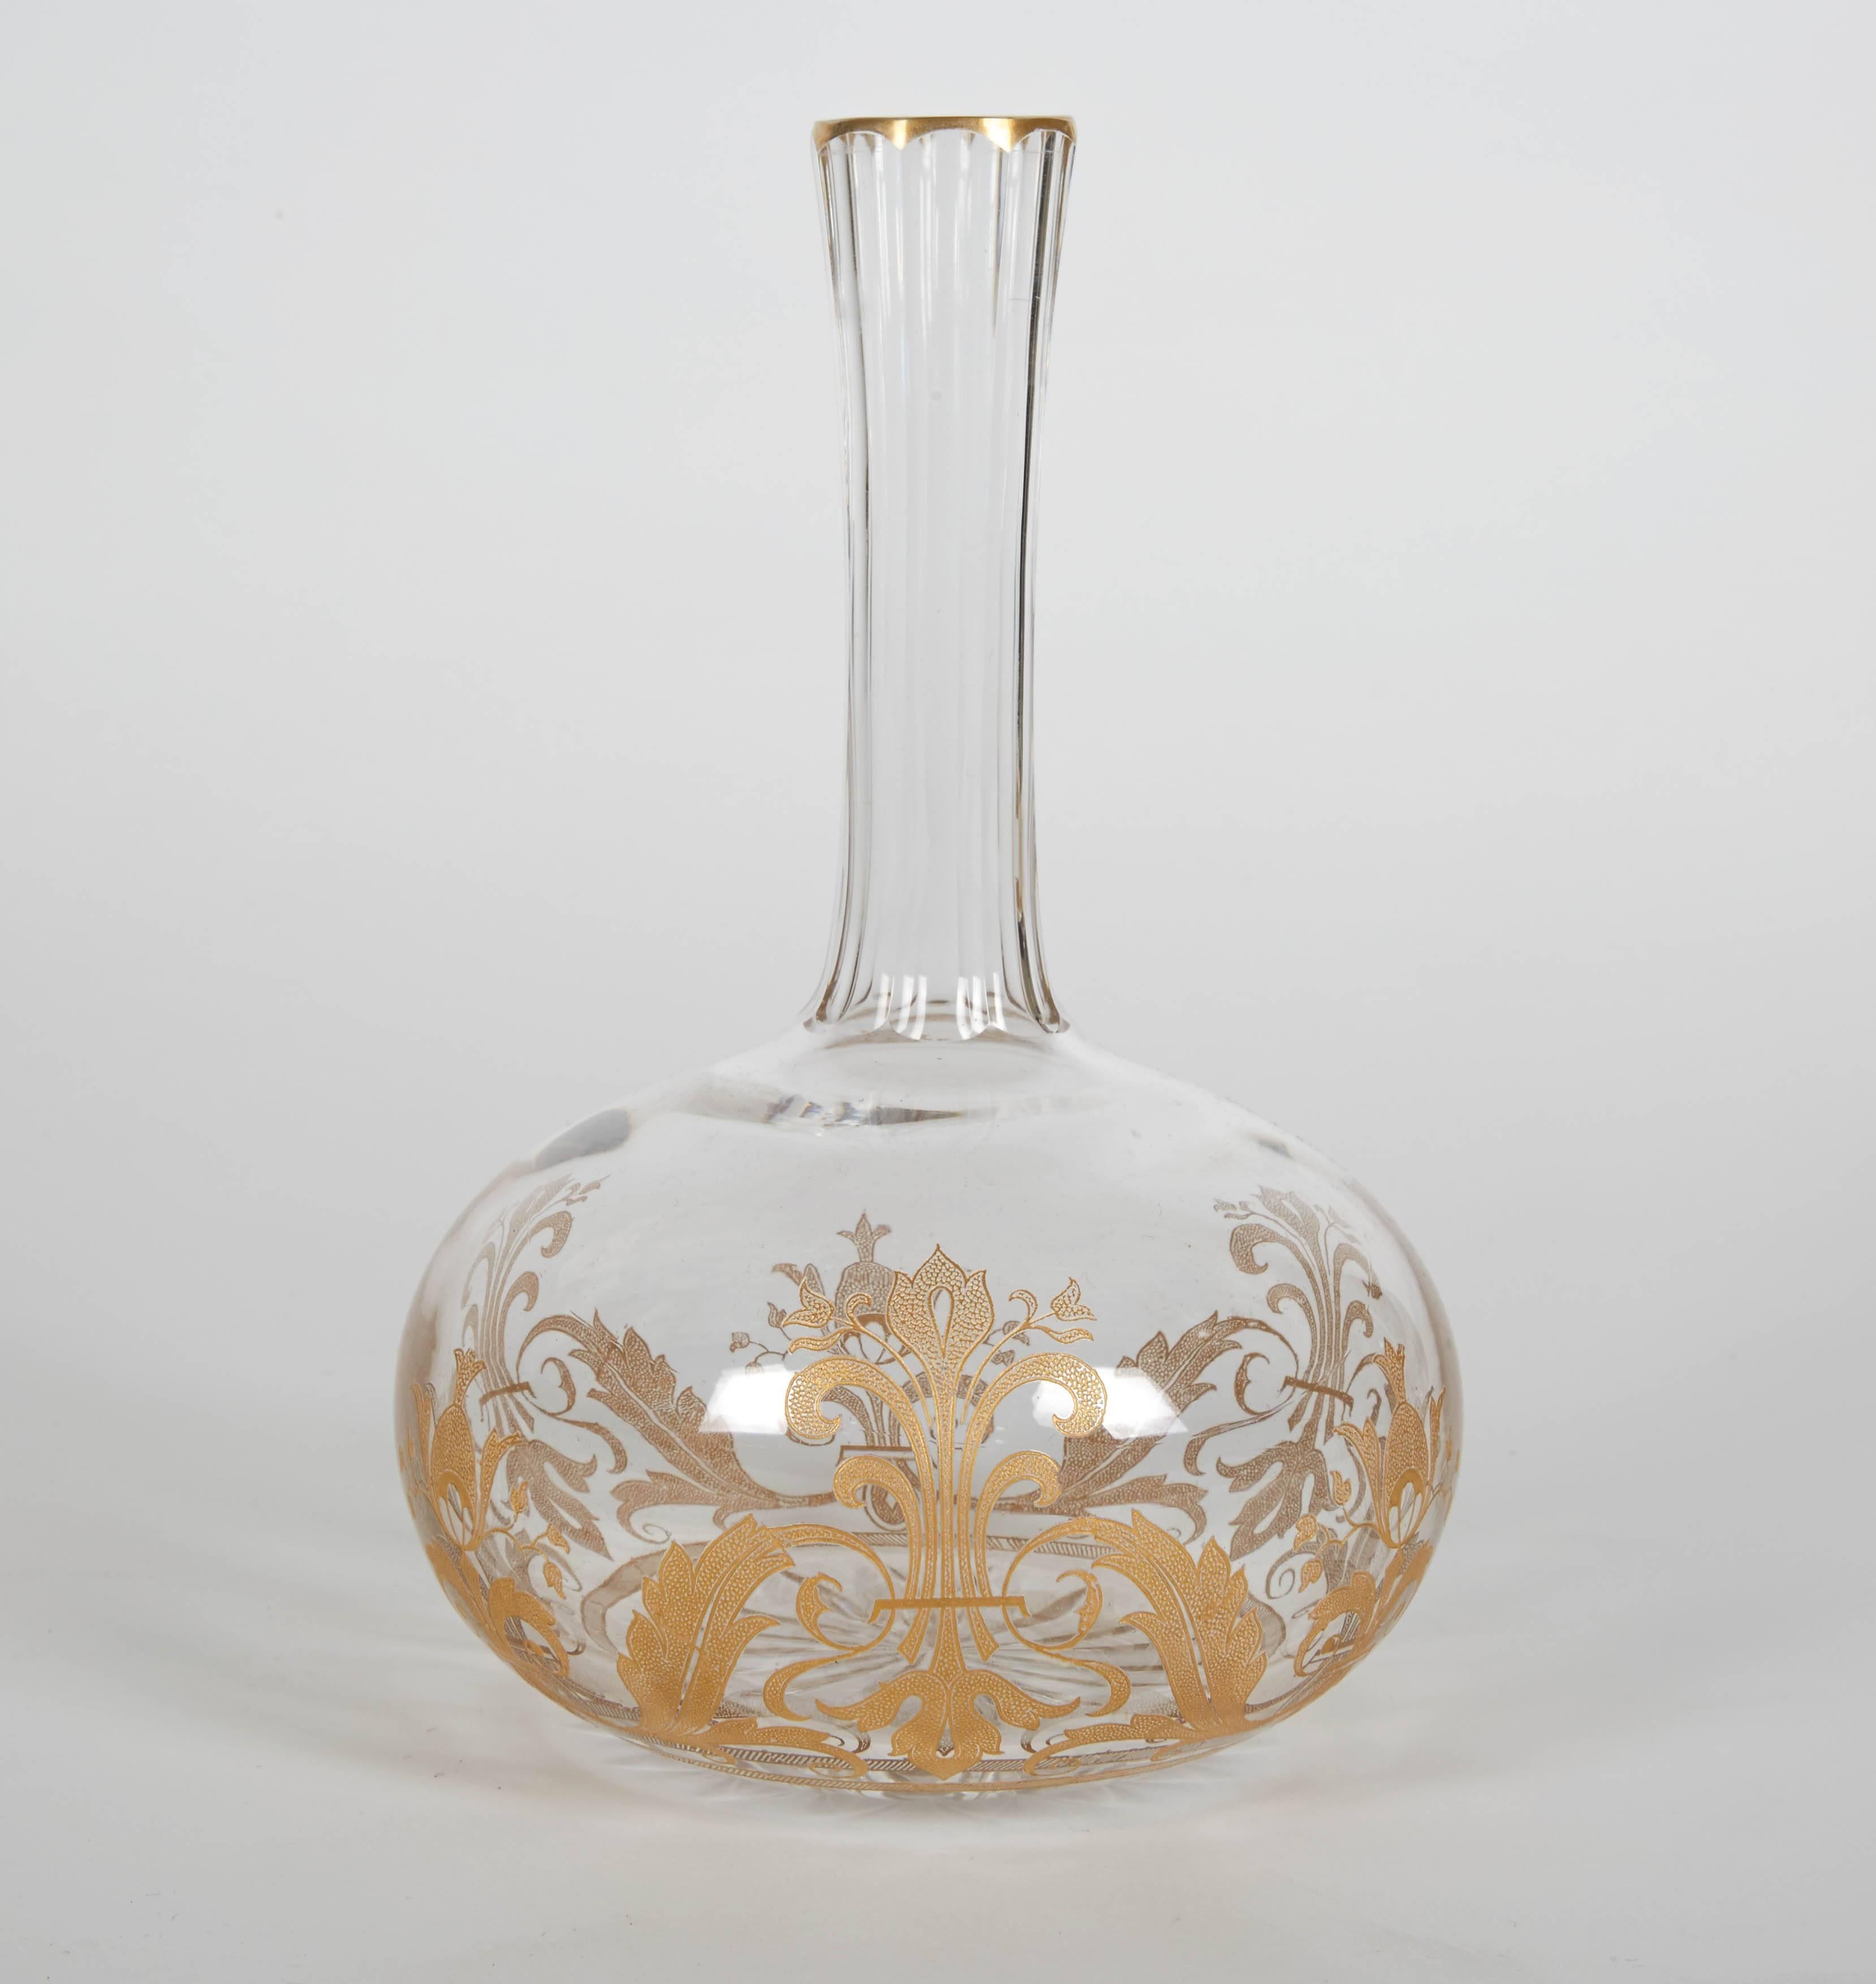 Pair of clear and tall Baccarat carafes. Gilded gold is elegantly displayed on the glass. The carafes are perfect for entertaining during cocktails, dinner or dessert. Baccarat crystal is a manufacturer of fine and luxury crystal glassware located